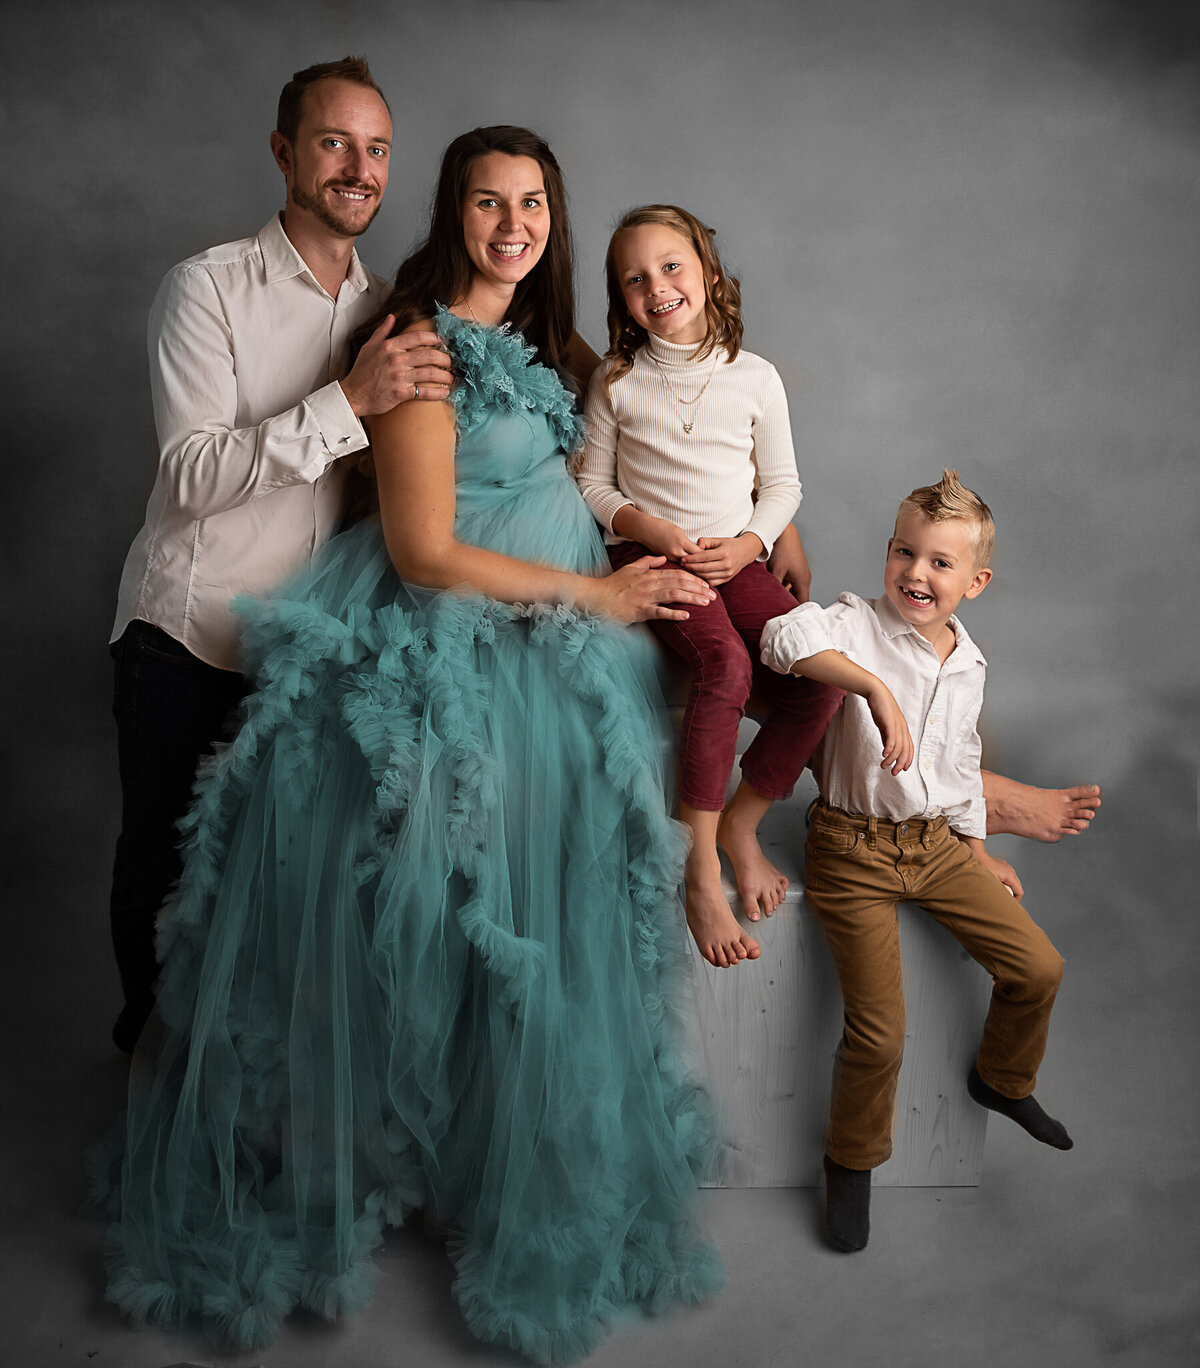 Maternity portrait session with kids and husband on a grey textured background.